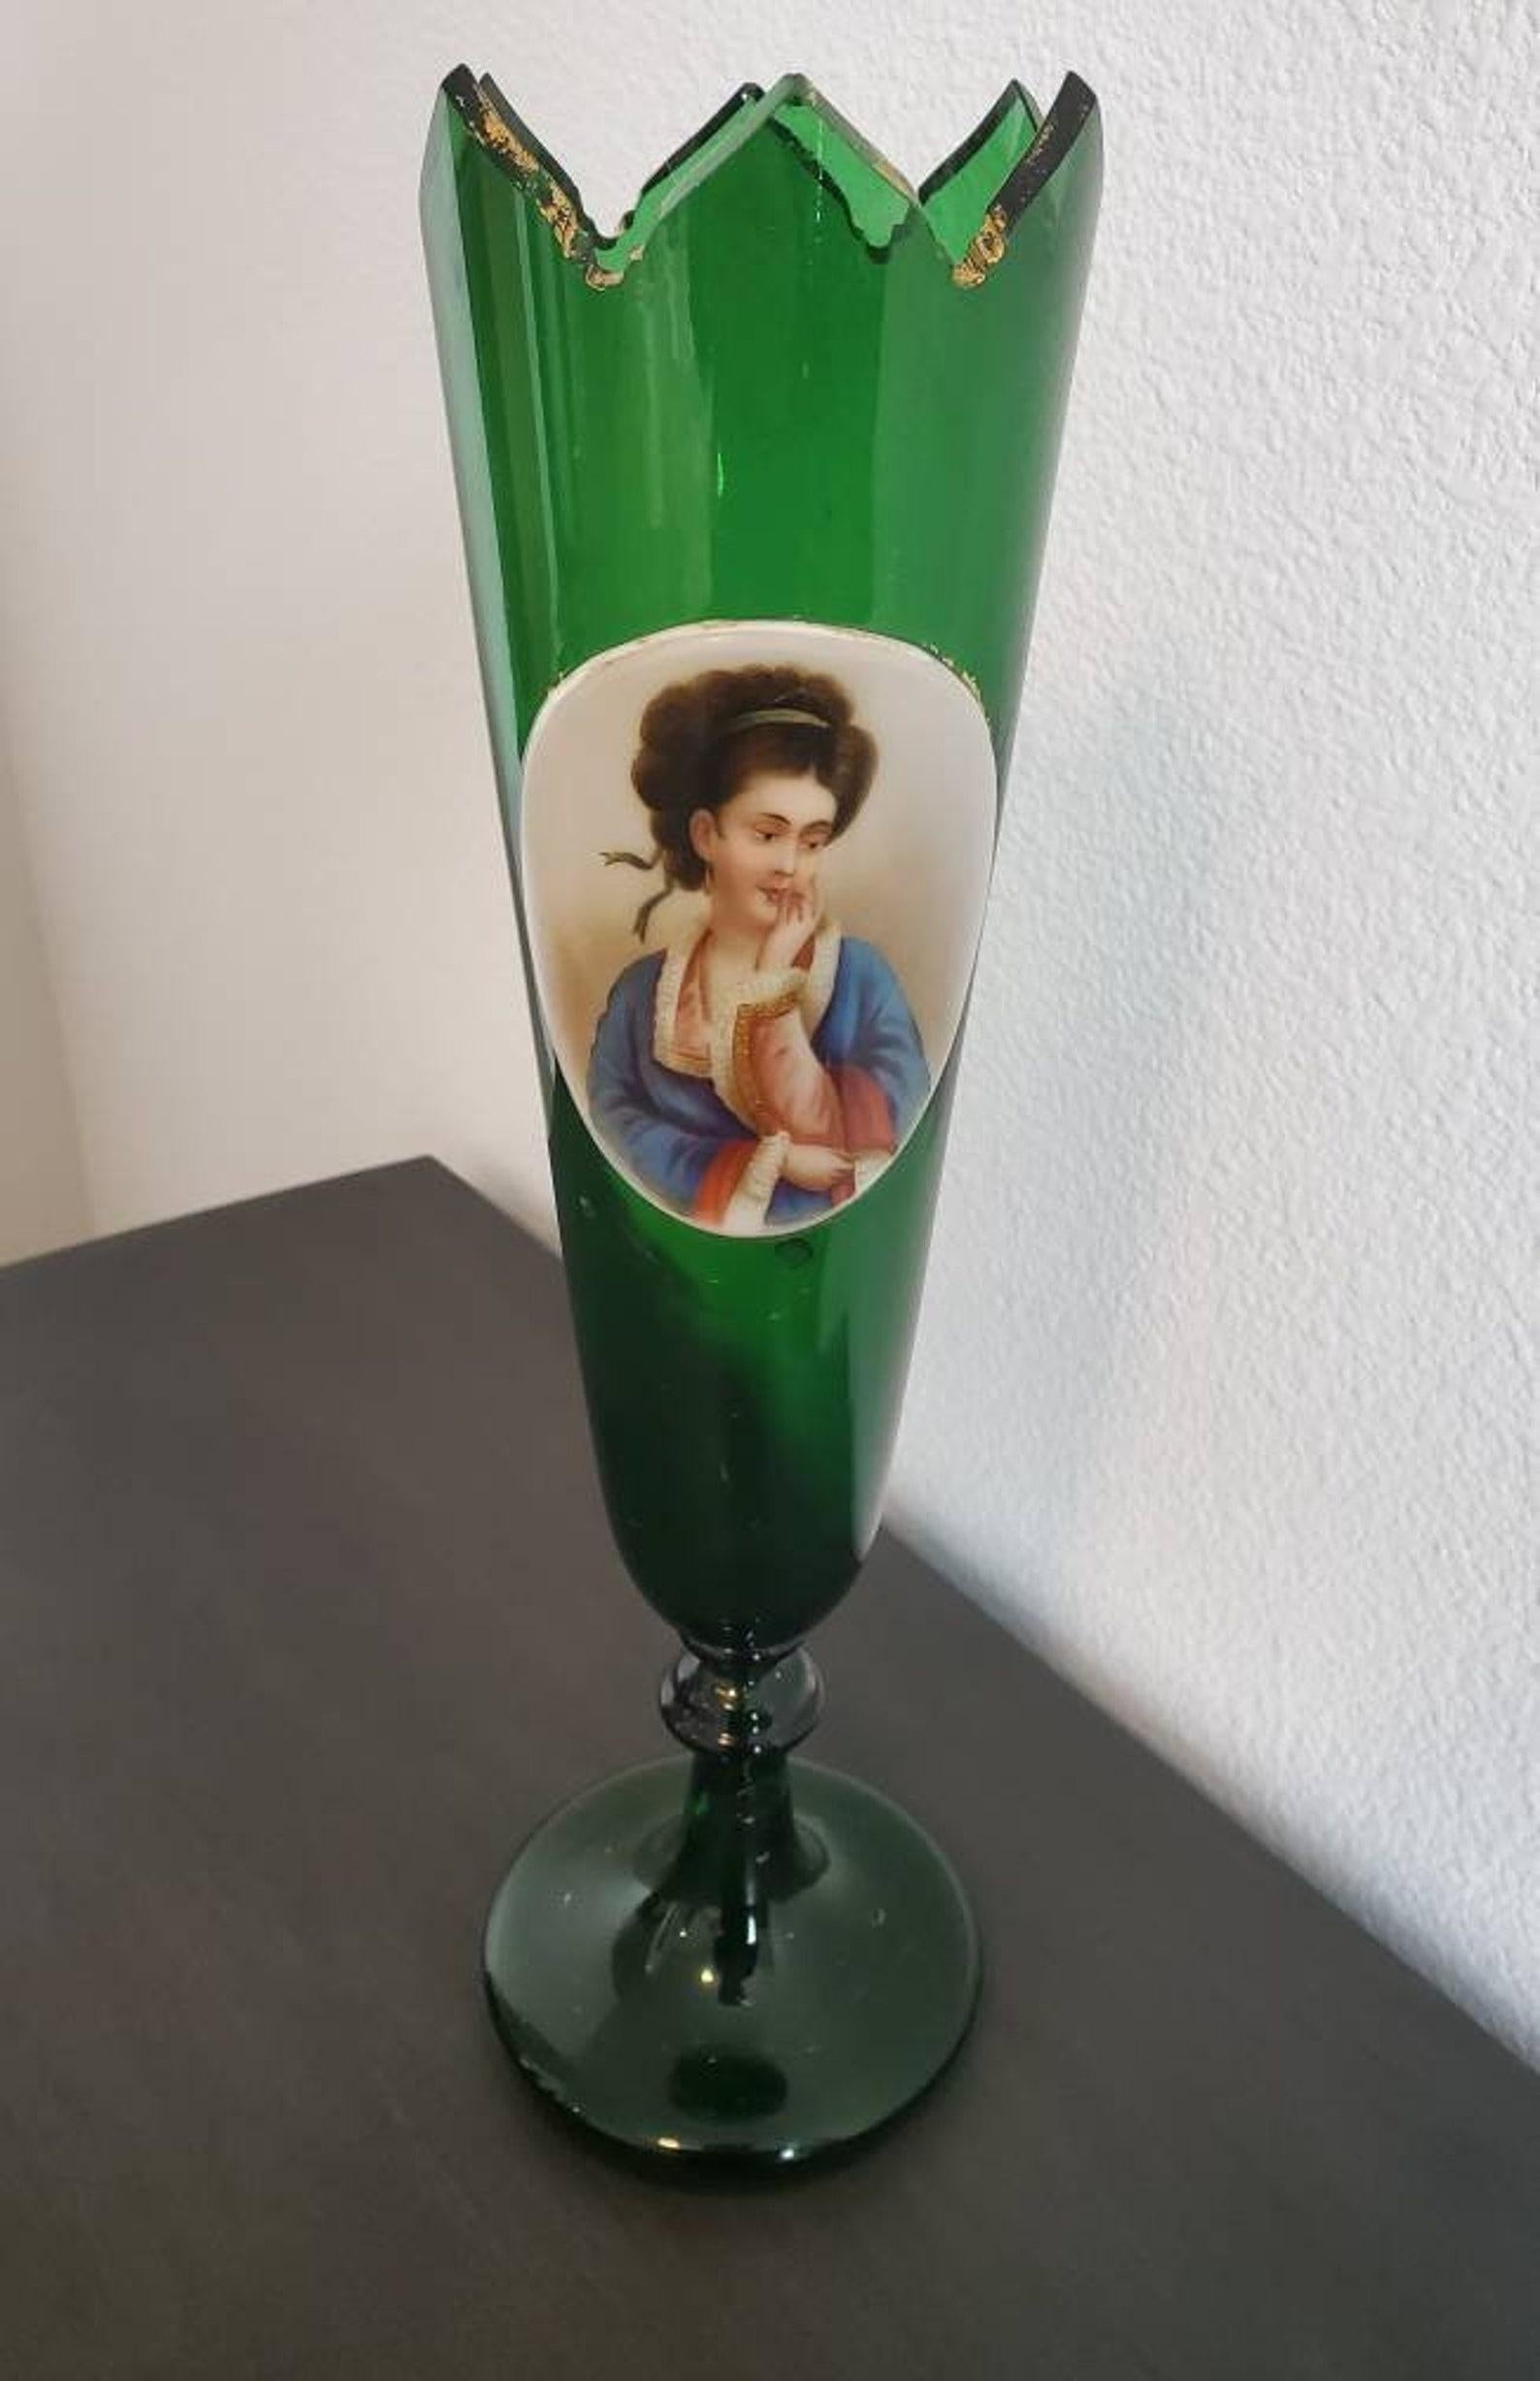 A very fine quality antique Bohemian parcel-gilt emerald green art glass portrait vase attributed to luxury glassware icon, Moser Glassworks (1857-present).

Hand blown and painted in Bohemia (present day Czech Republic) in the late 19th century.